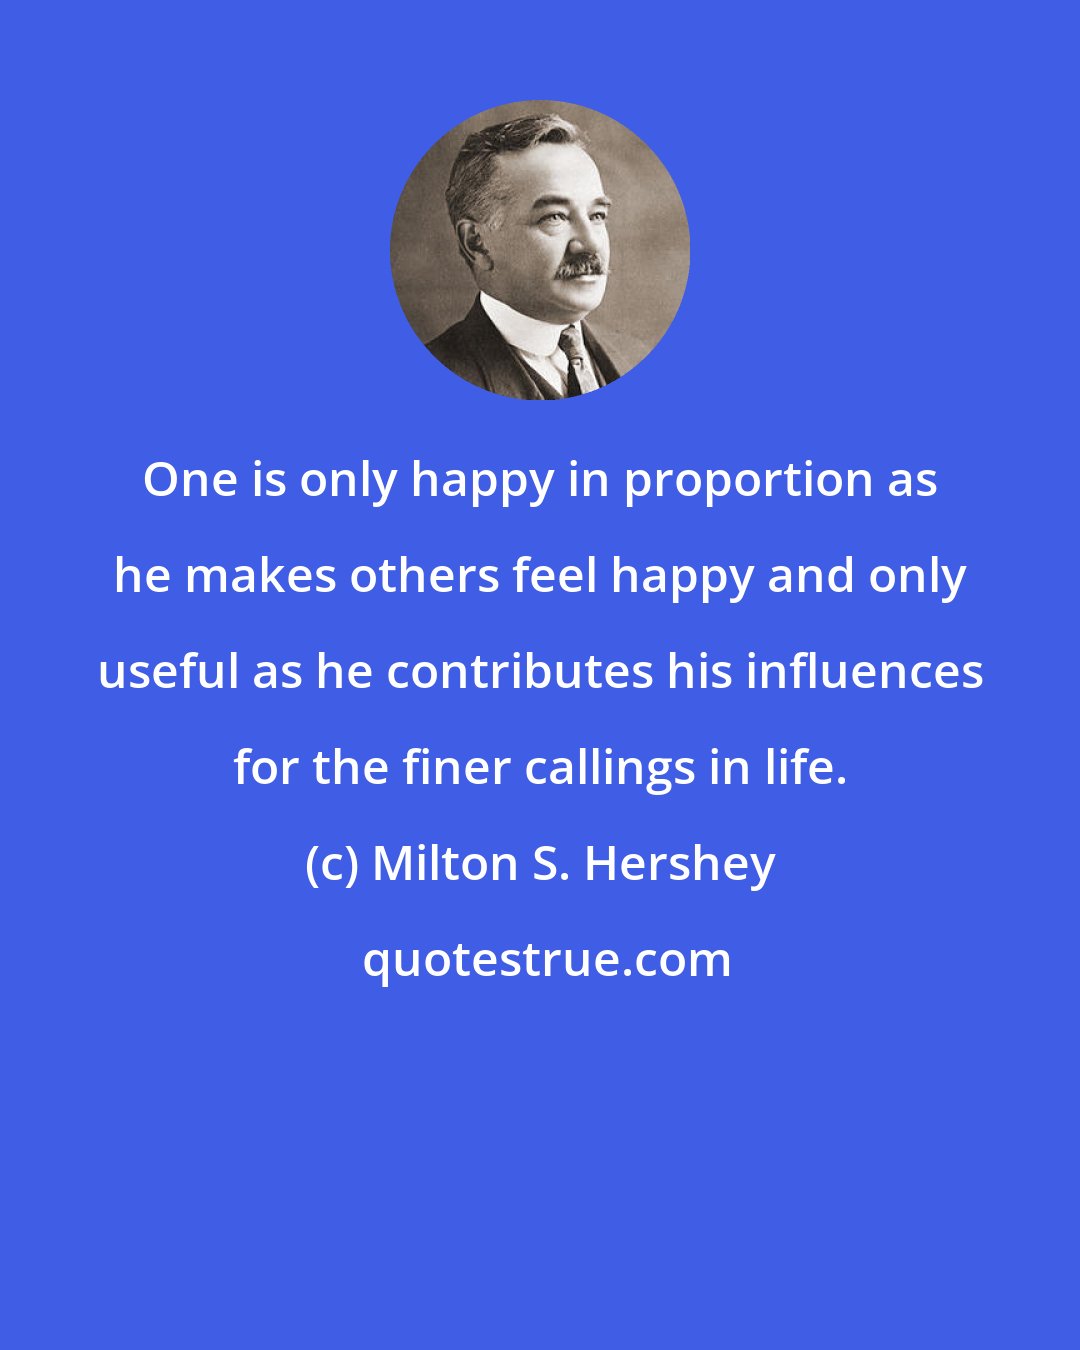 Milton S. Hershey: One is only happy in proportion as he makes others feel happy and only useful as he contributes his influences for the finer callings in life.